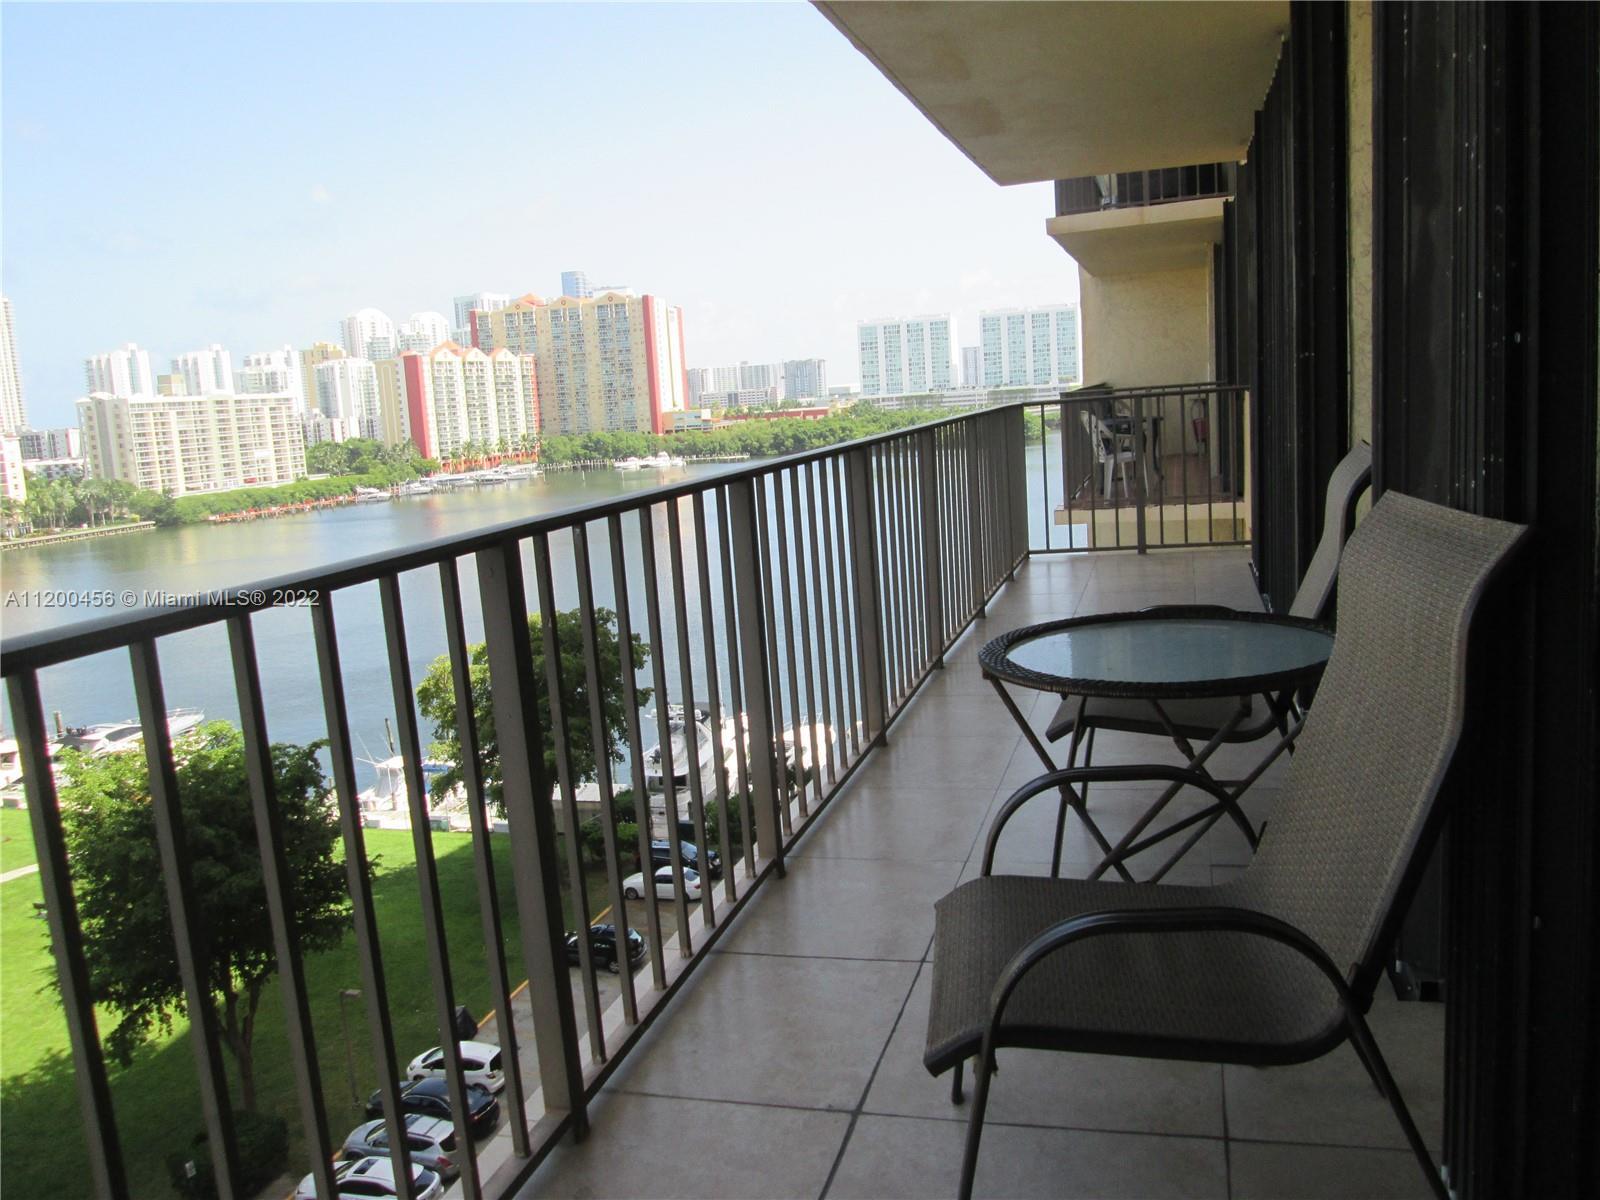 2-BEDROOM APARTMENT HOME WITH 1,507 SQUARE FEET OF SPACE, INCLUDING 2 BATHS, 3.4' LONG BALCONY AND K